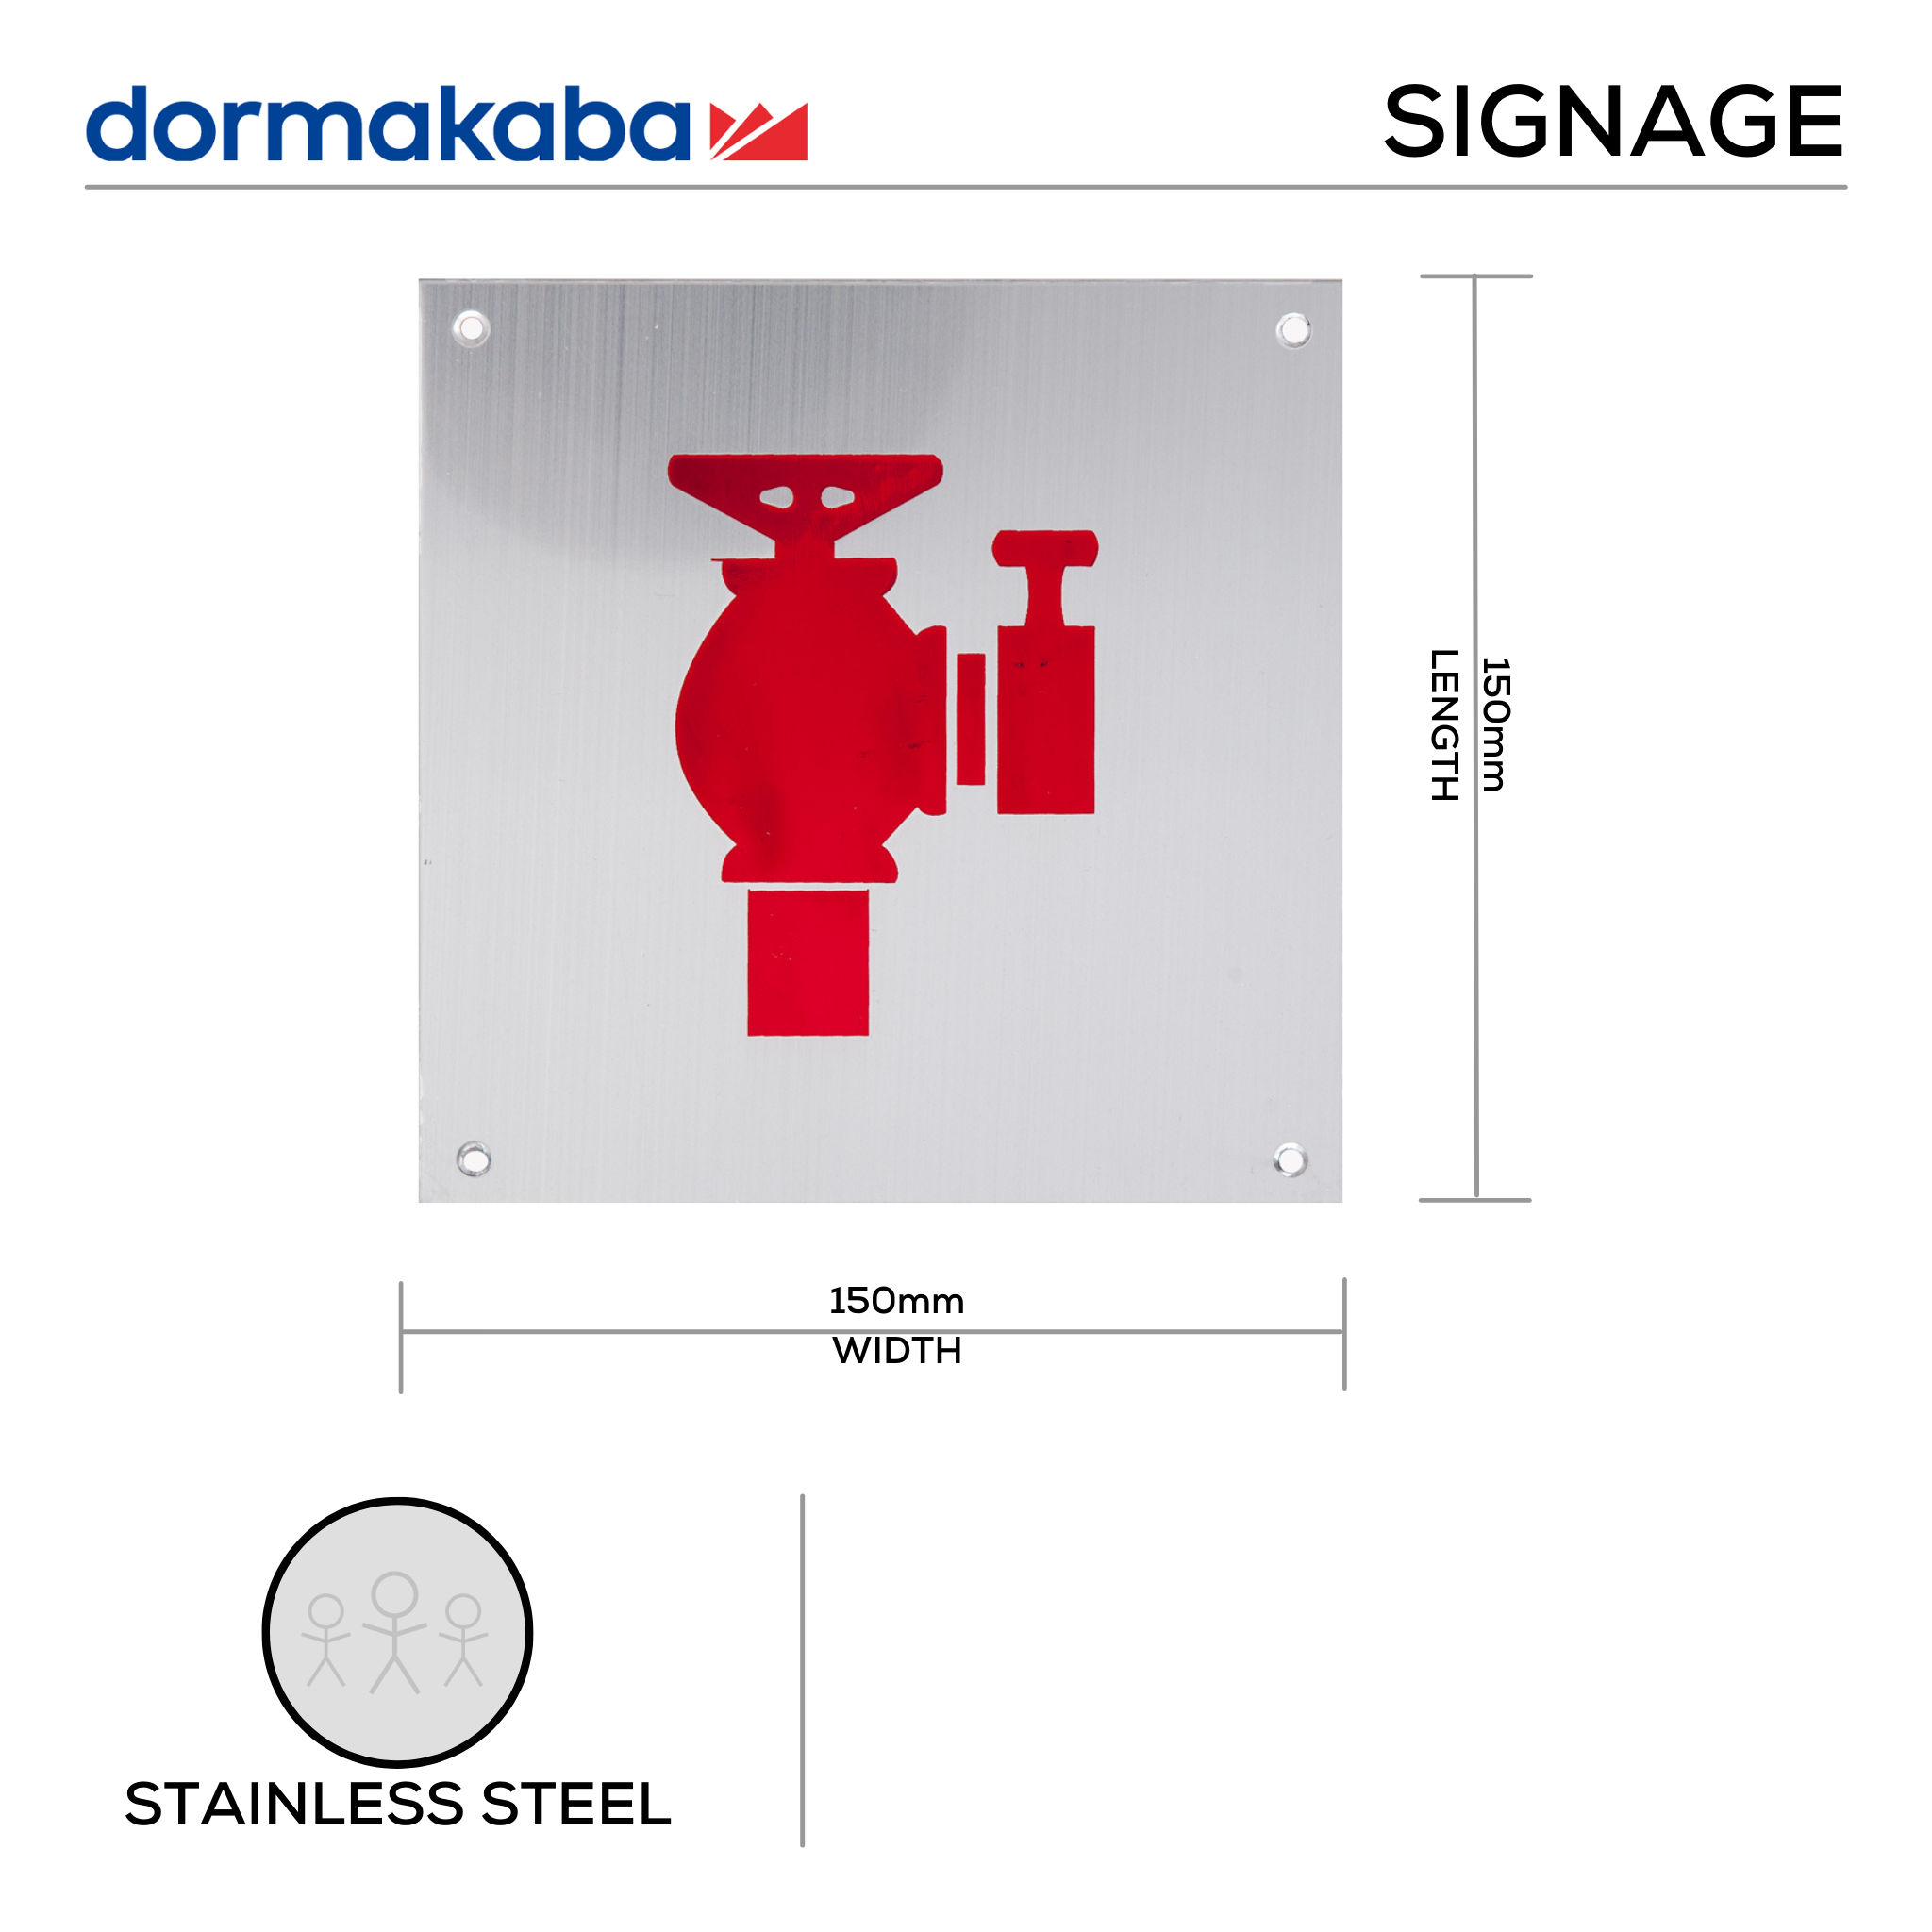 DSS-147, Door Signage, Fire Hydrant , 150mm (l), 150mm (w), 1,2mm (t), Stainless Steel, DORMAKABA